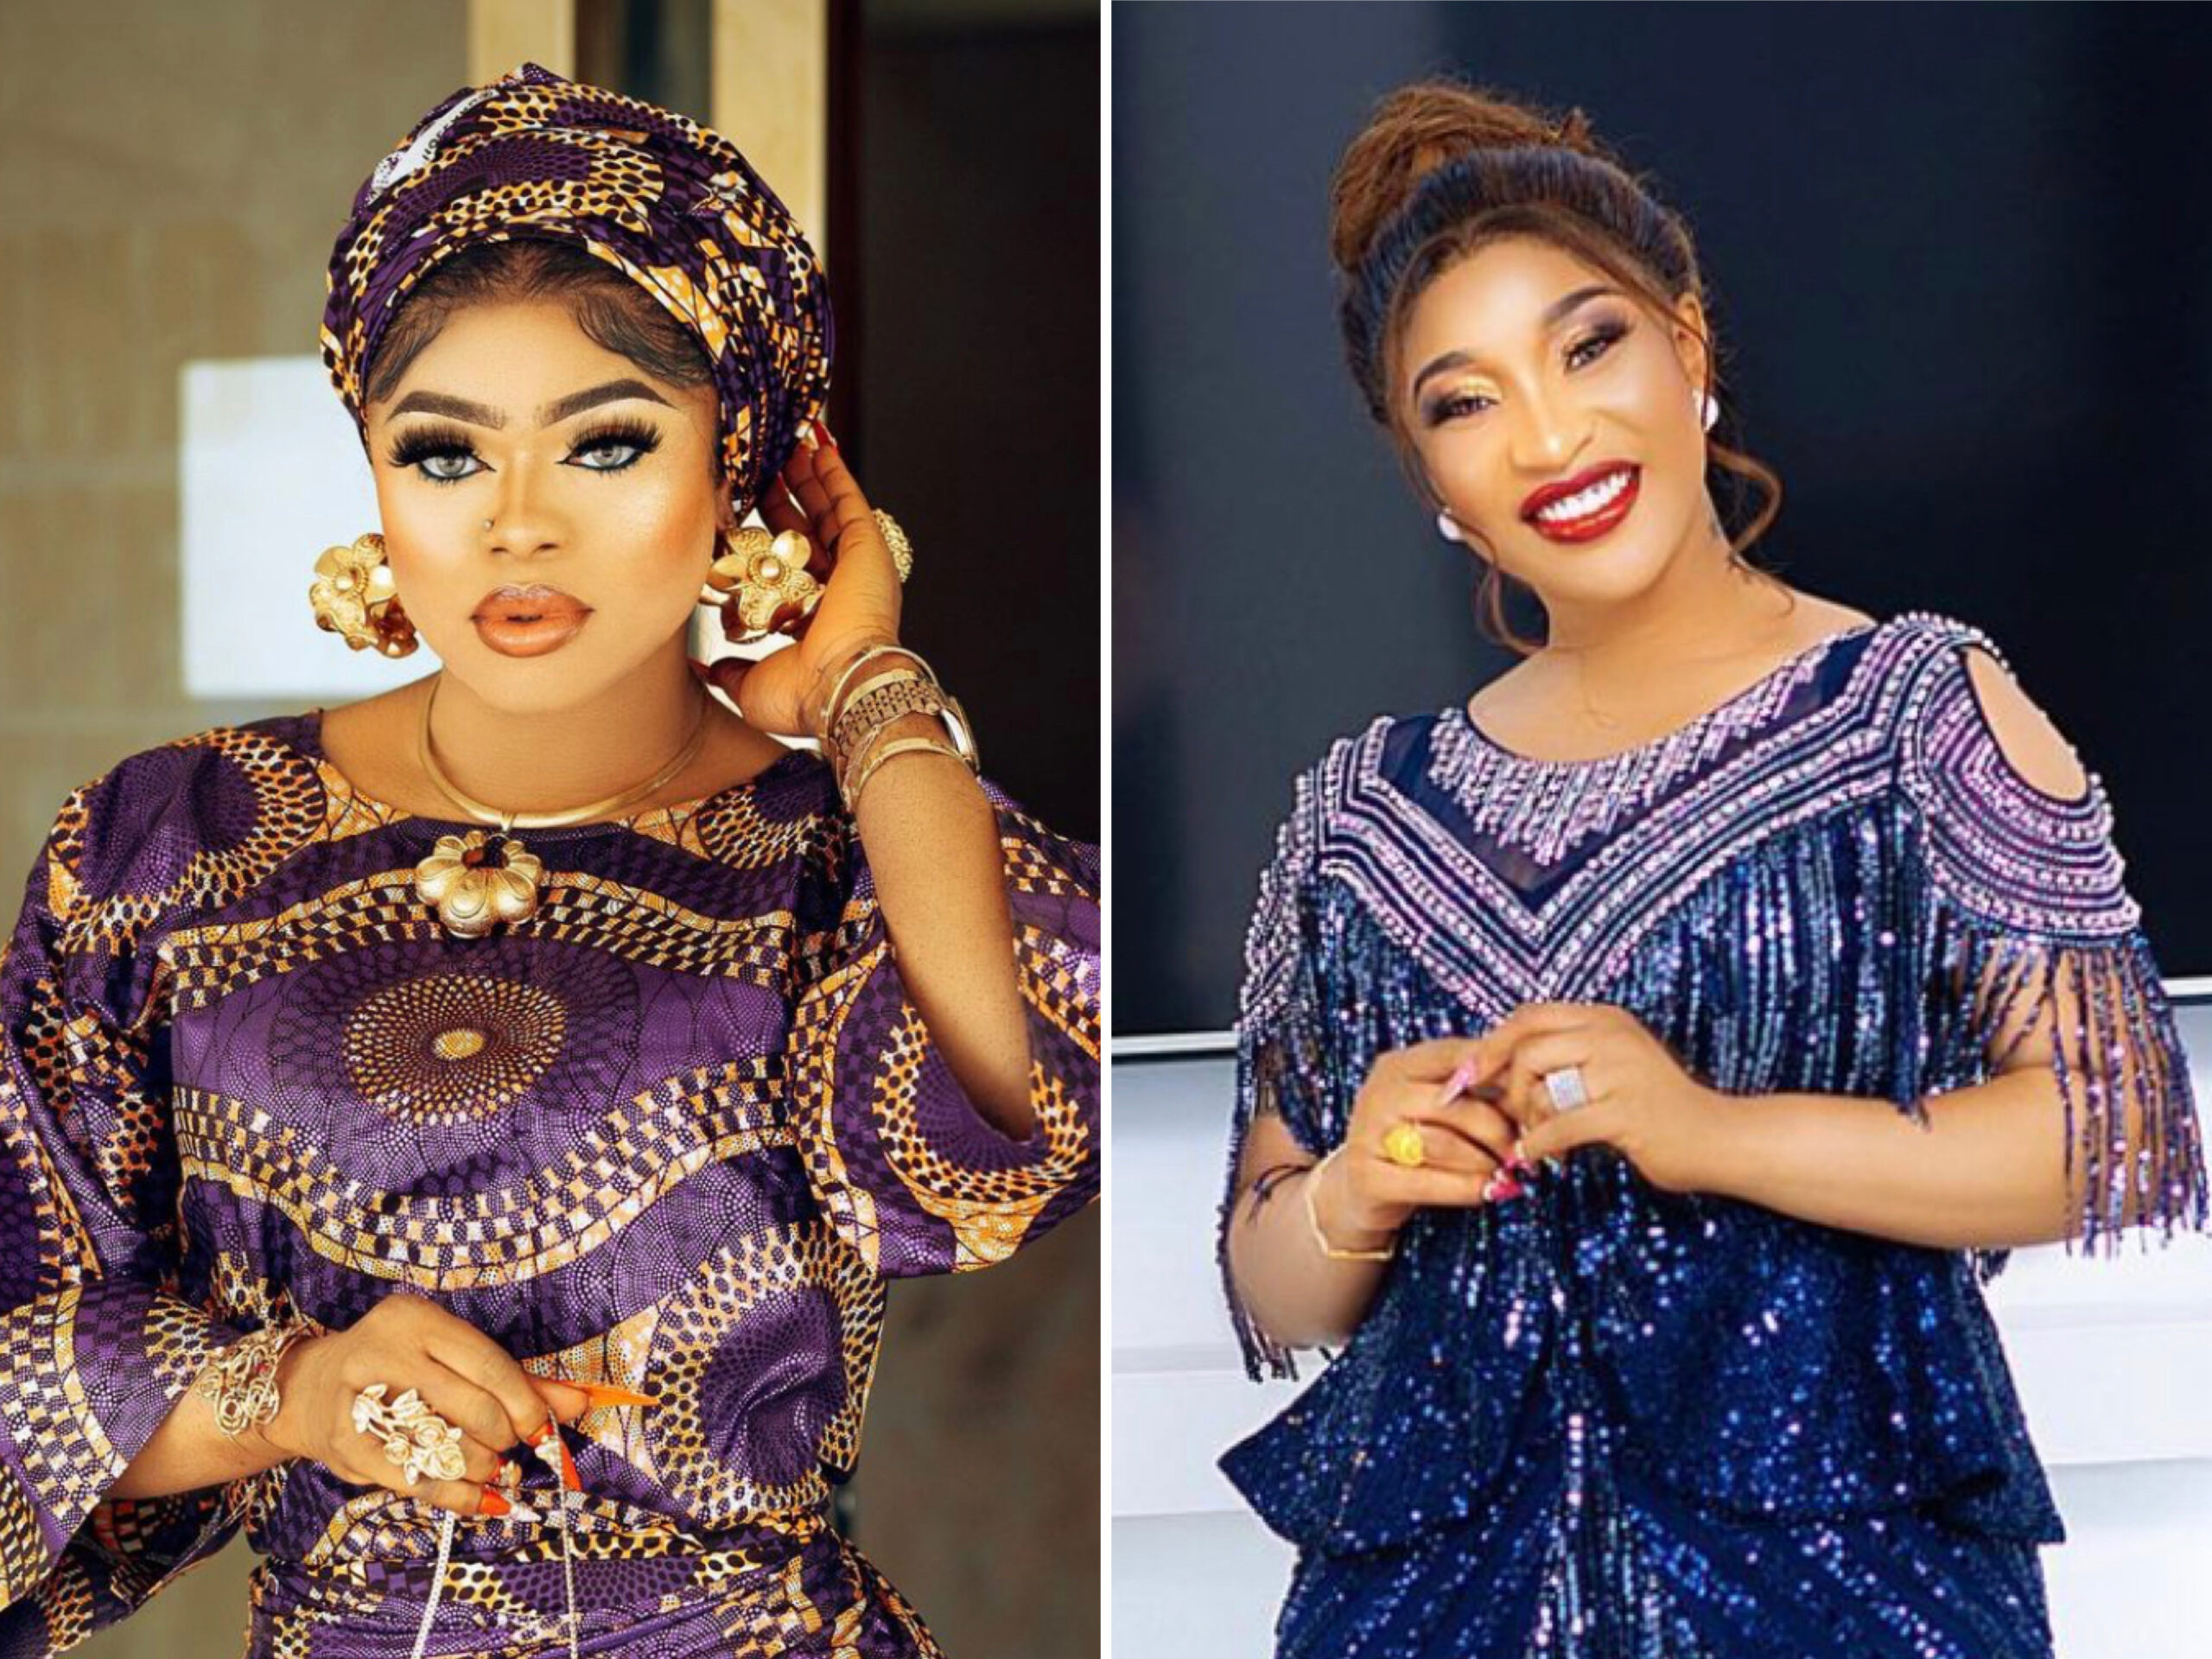 ‘I Humiliated You’ - Bobrisky Publicly Apologises To Ex-Best Friend, Tonto Dikeh For Calling Her Out On Social Media